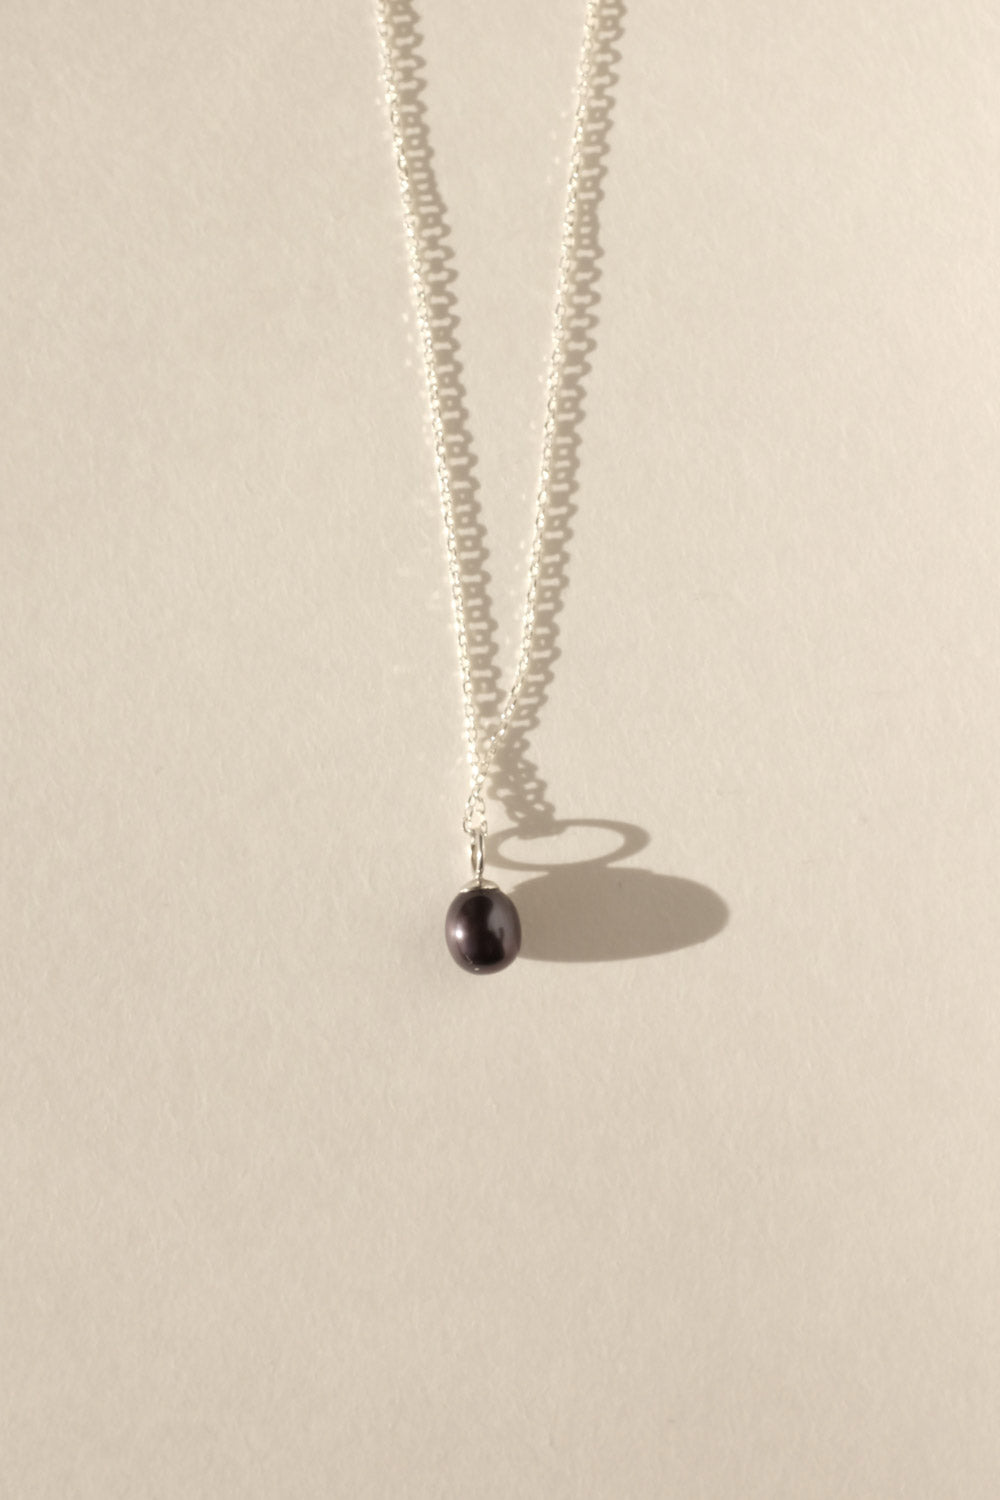 SIMPLE LONG BLACK PEARL NECKLACE 925